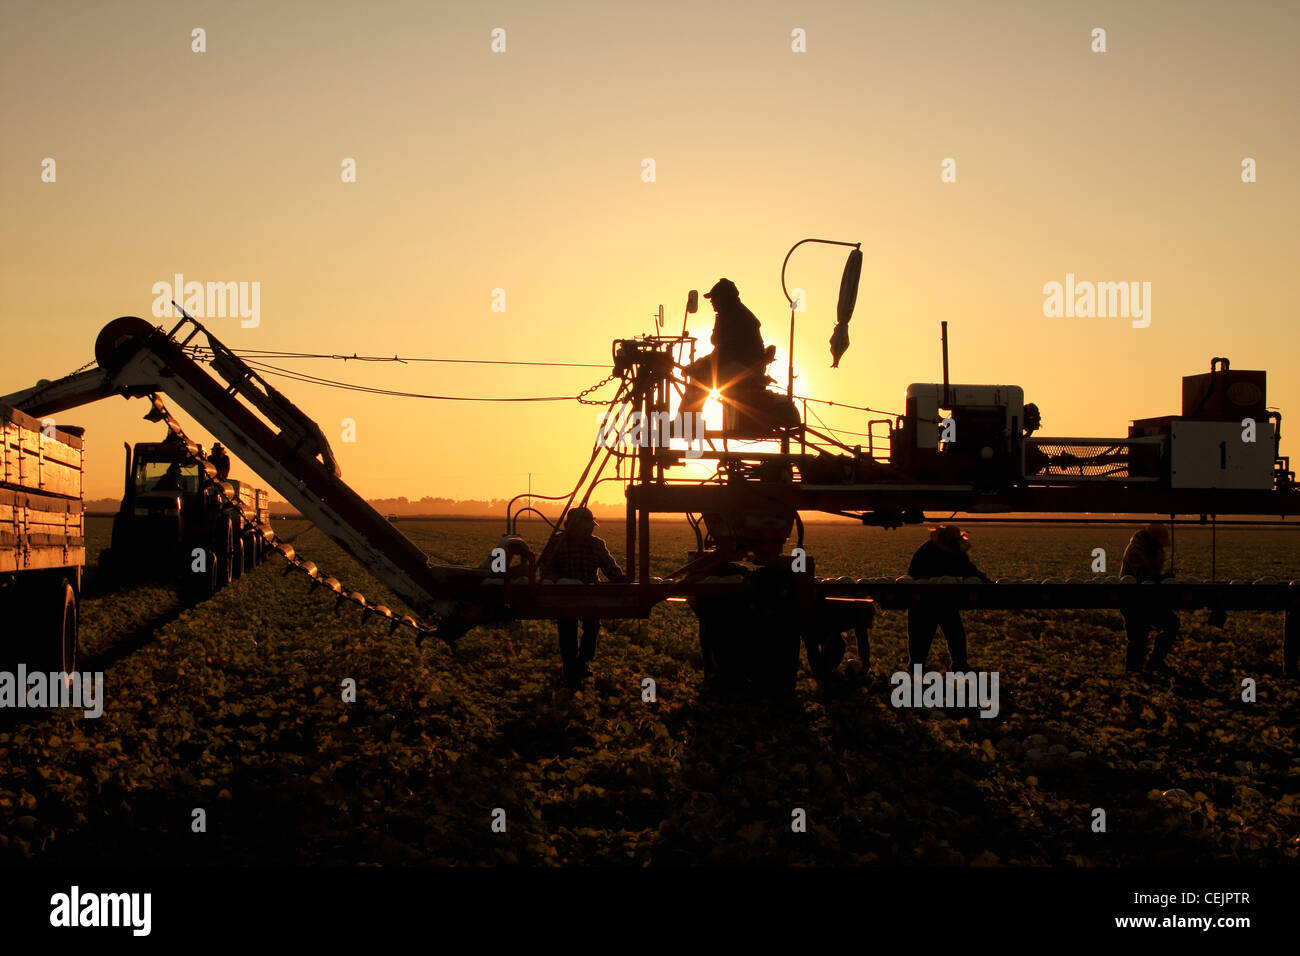 Agriculture - A field crew harvesting Honeydew melons at sunrise / California, USA. Stock Photo